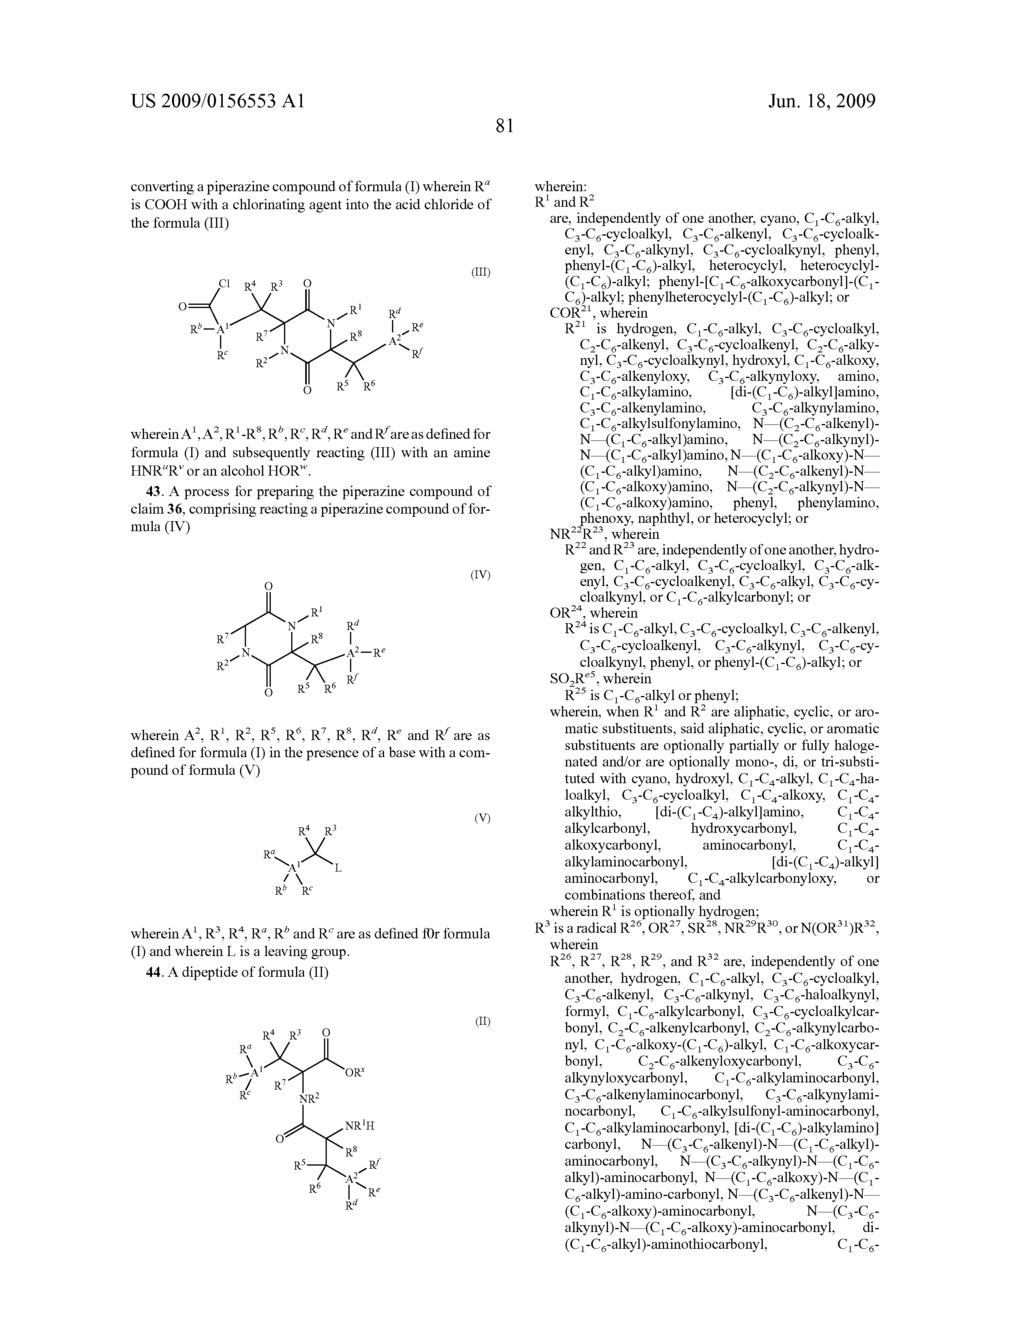 PIPERAZINE COMPOUNDS WITH A HERBICIDAL ACTION - diagram, schematic, and image 82